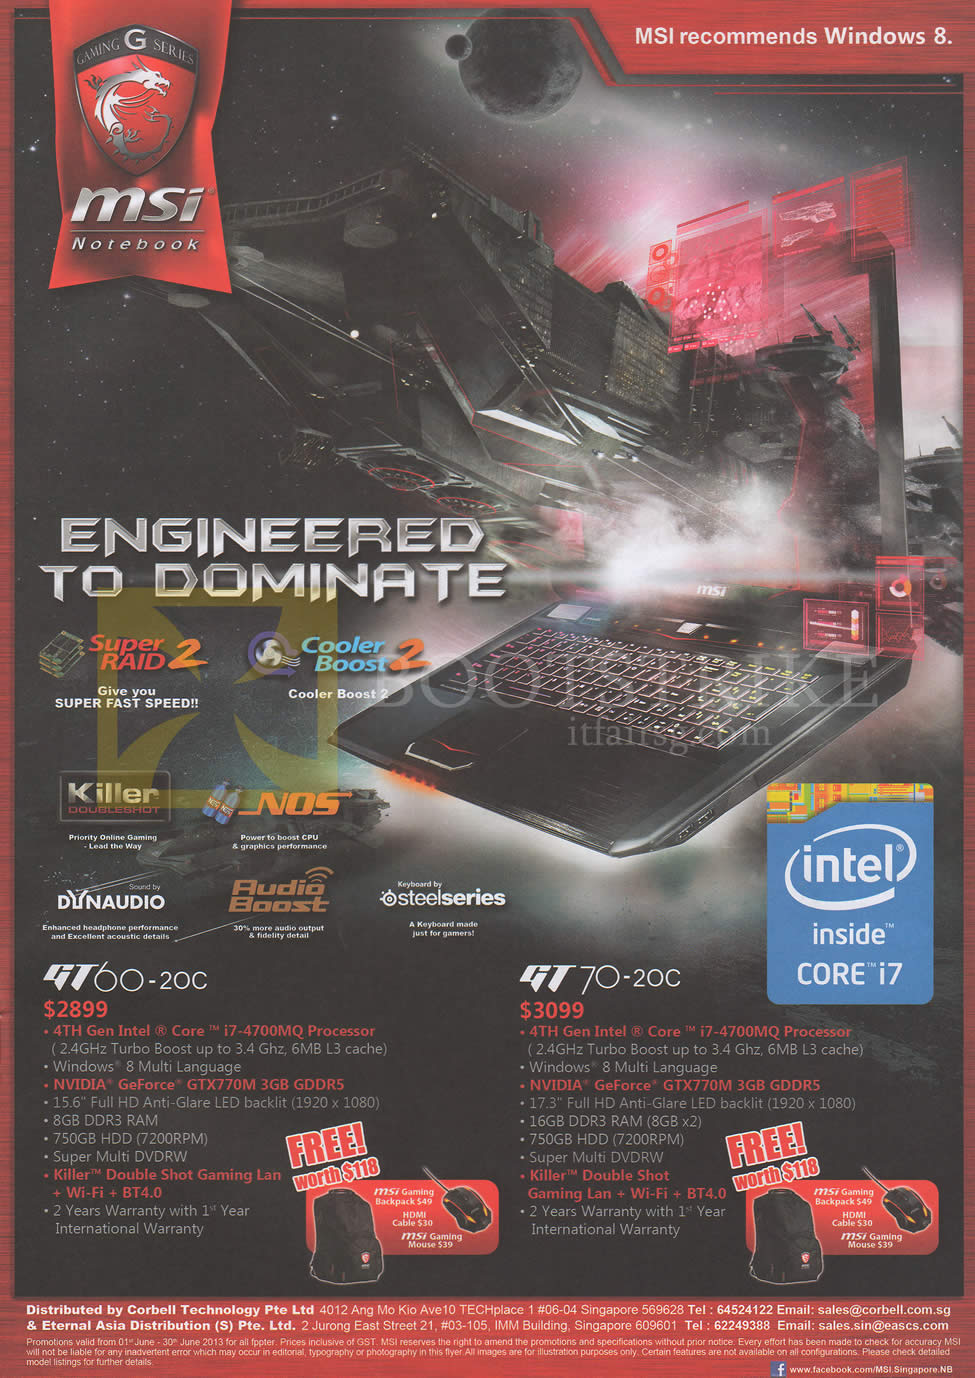 PC SHOW 2013 price list image brochure of MSI Notebooks GT60-20C, GT70-20C